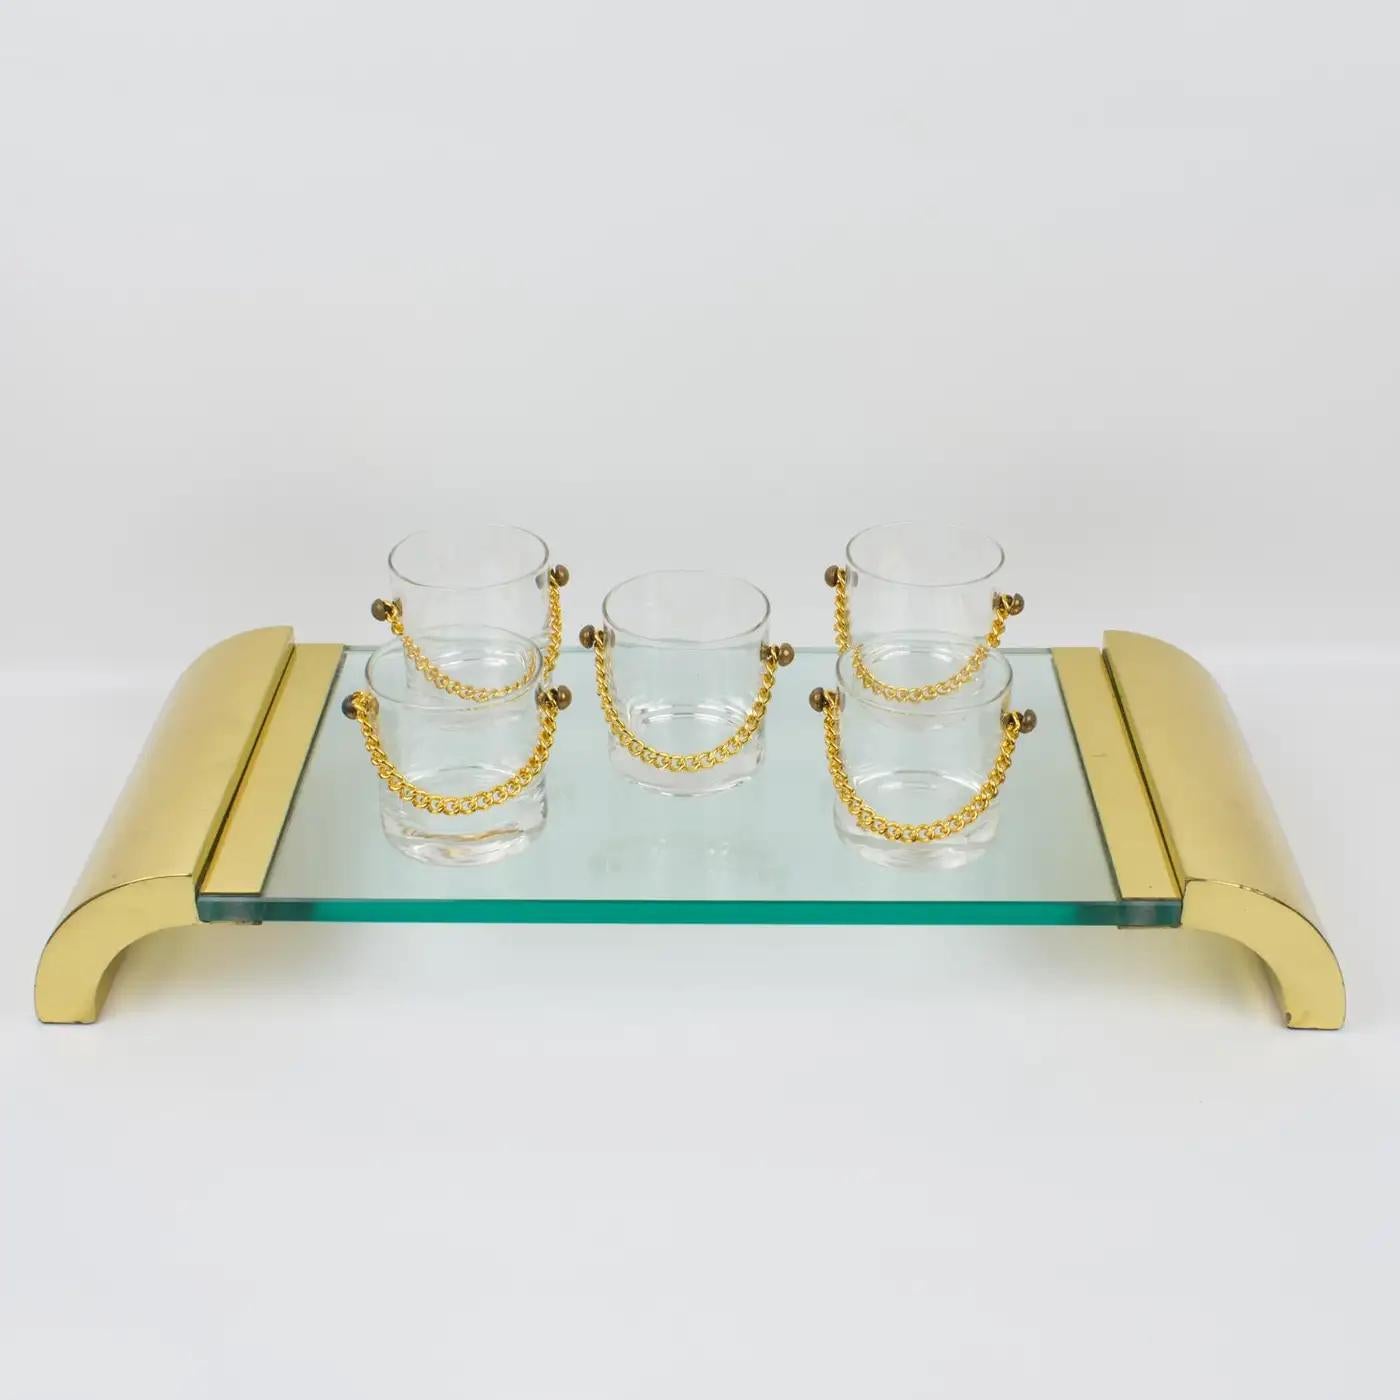 Modernist Brass and Glass Pedestal Centerpiece Display Tray, Italy 1980s For Sale 7